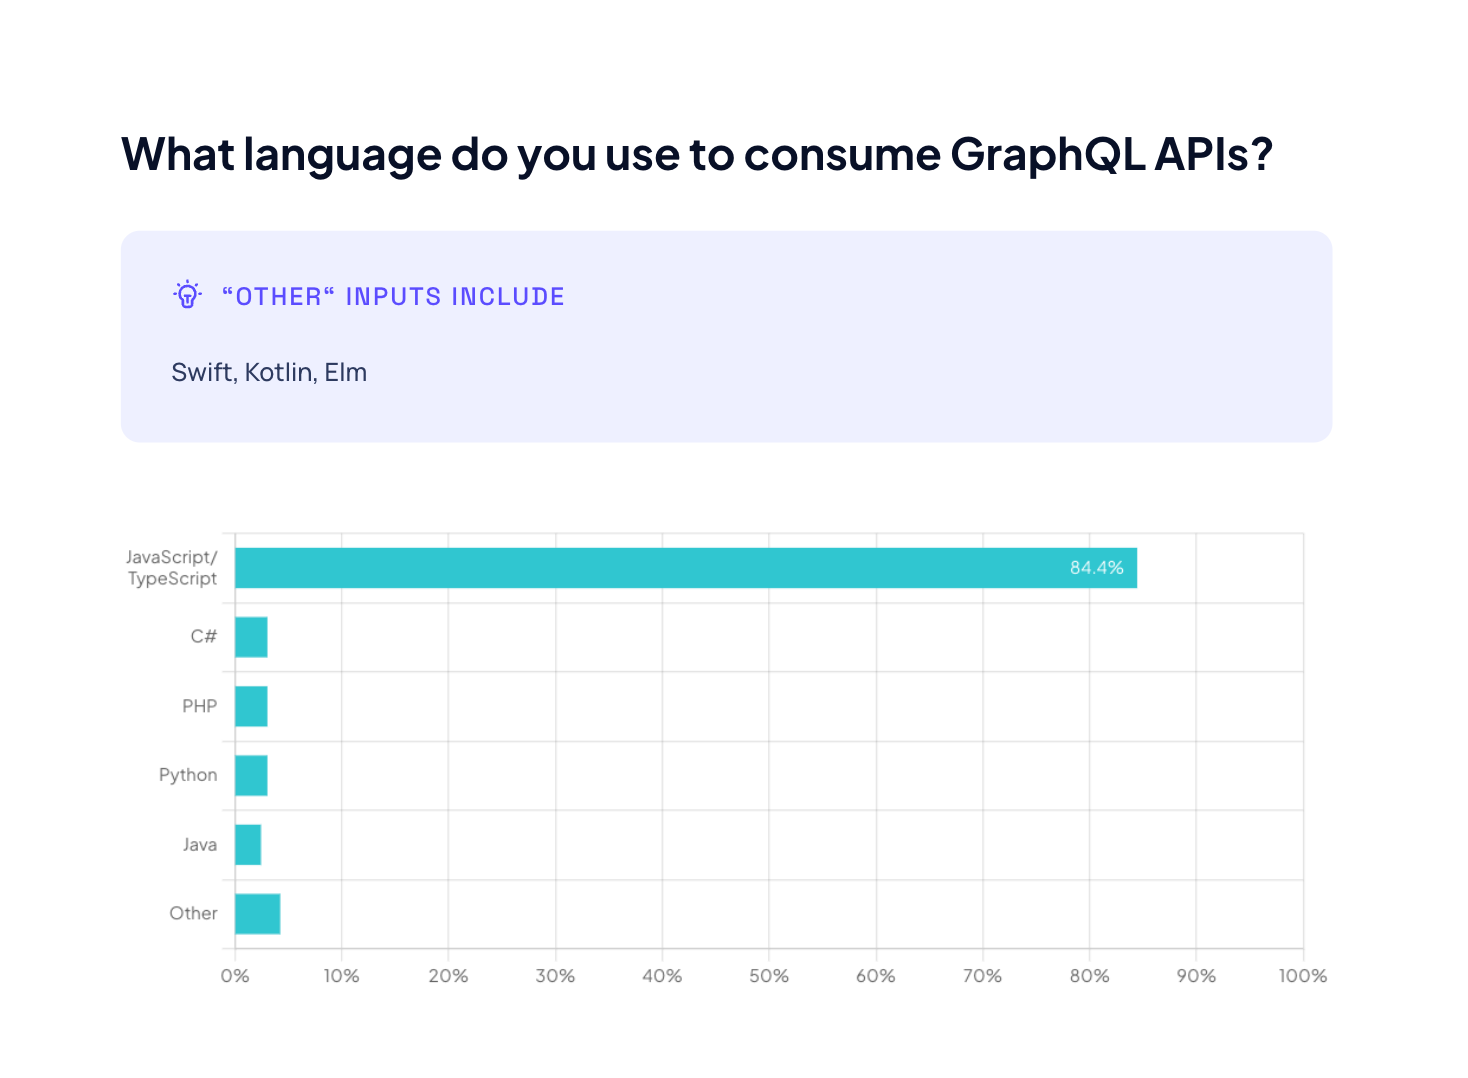 Top languages for developers to consume GraphQL API